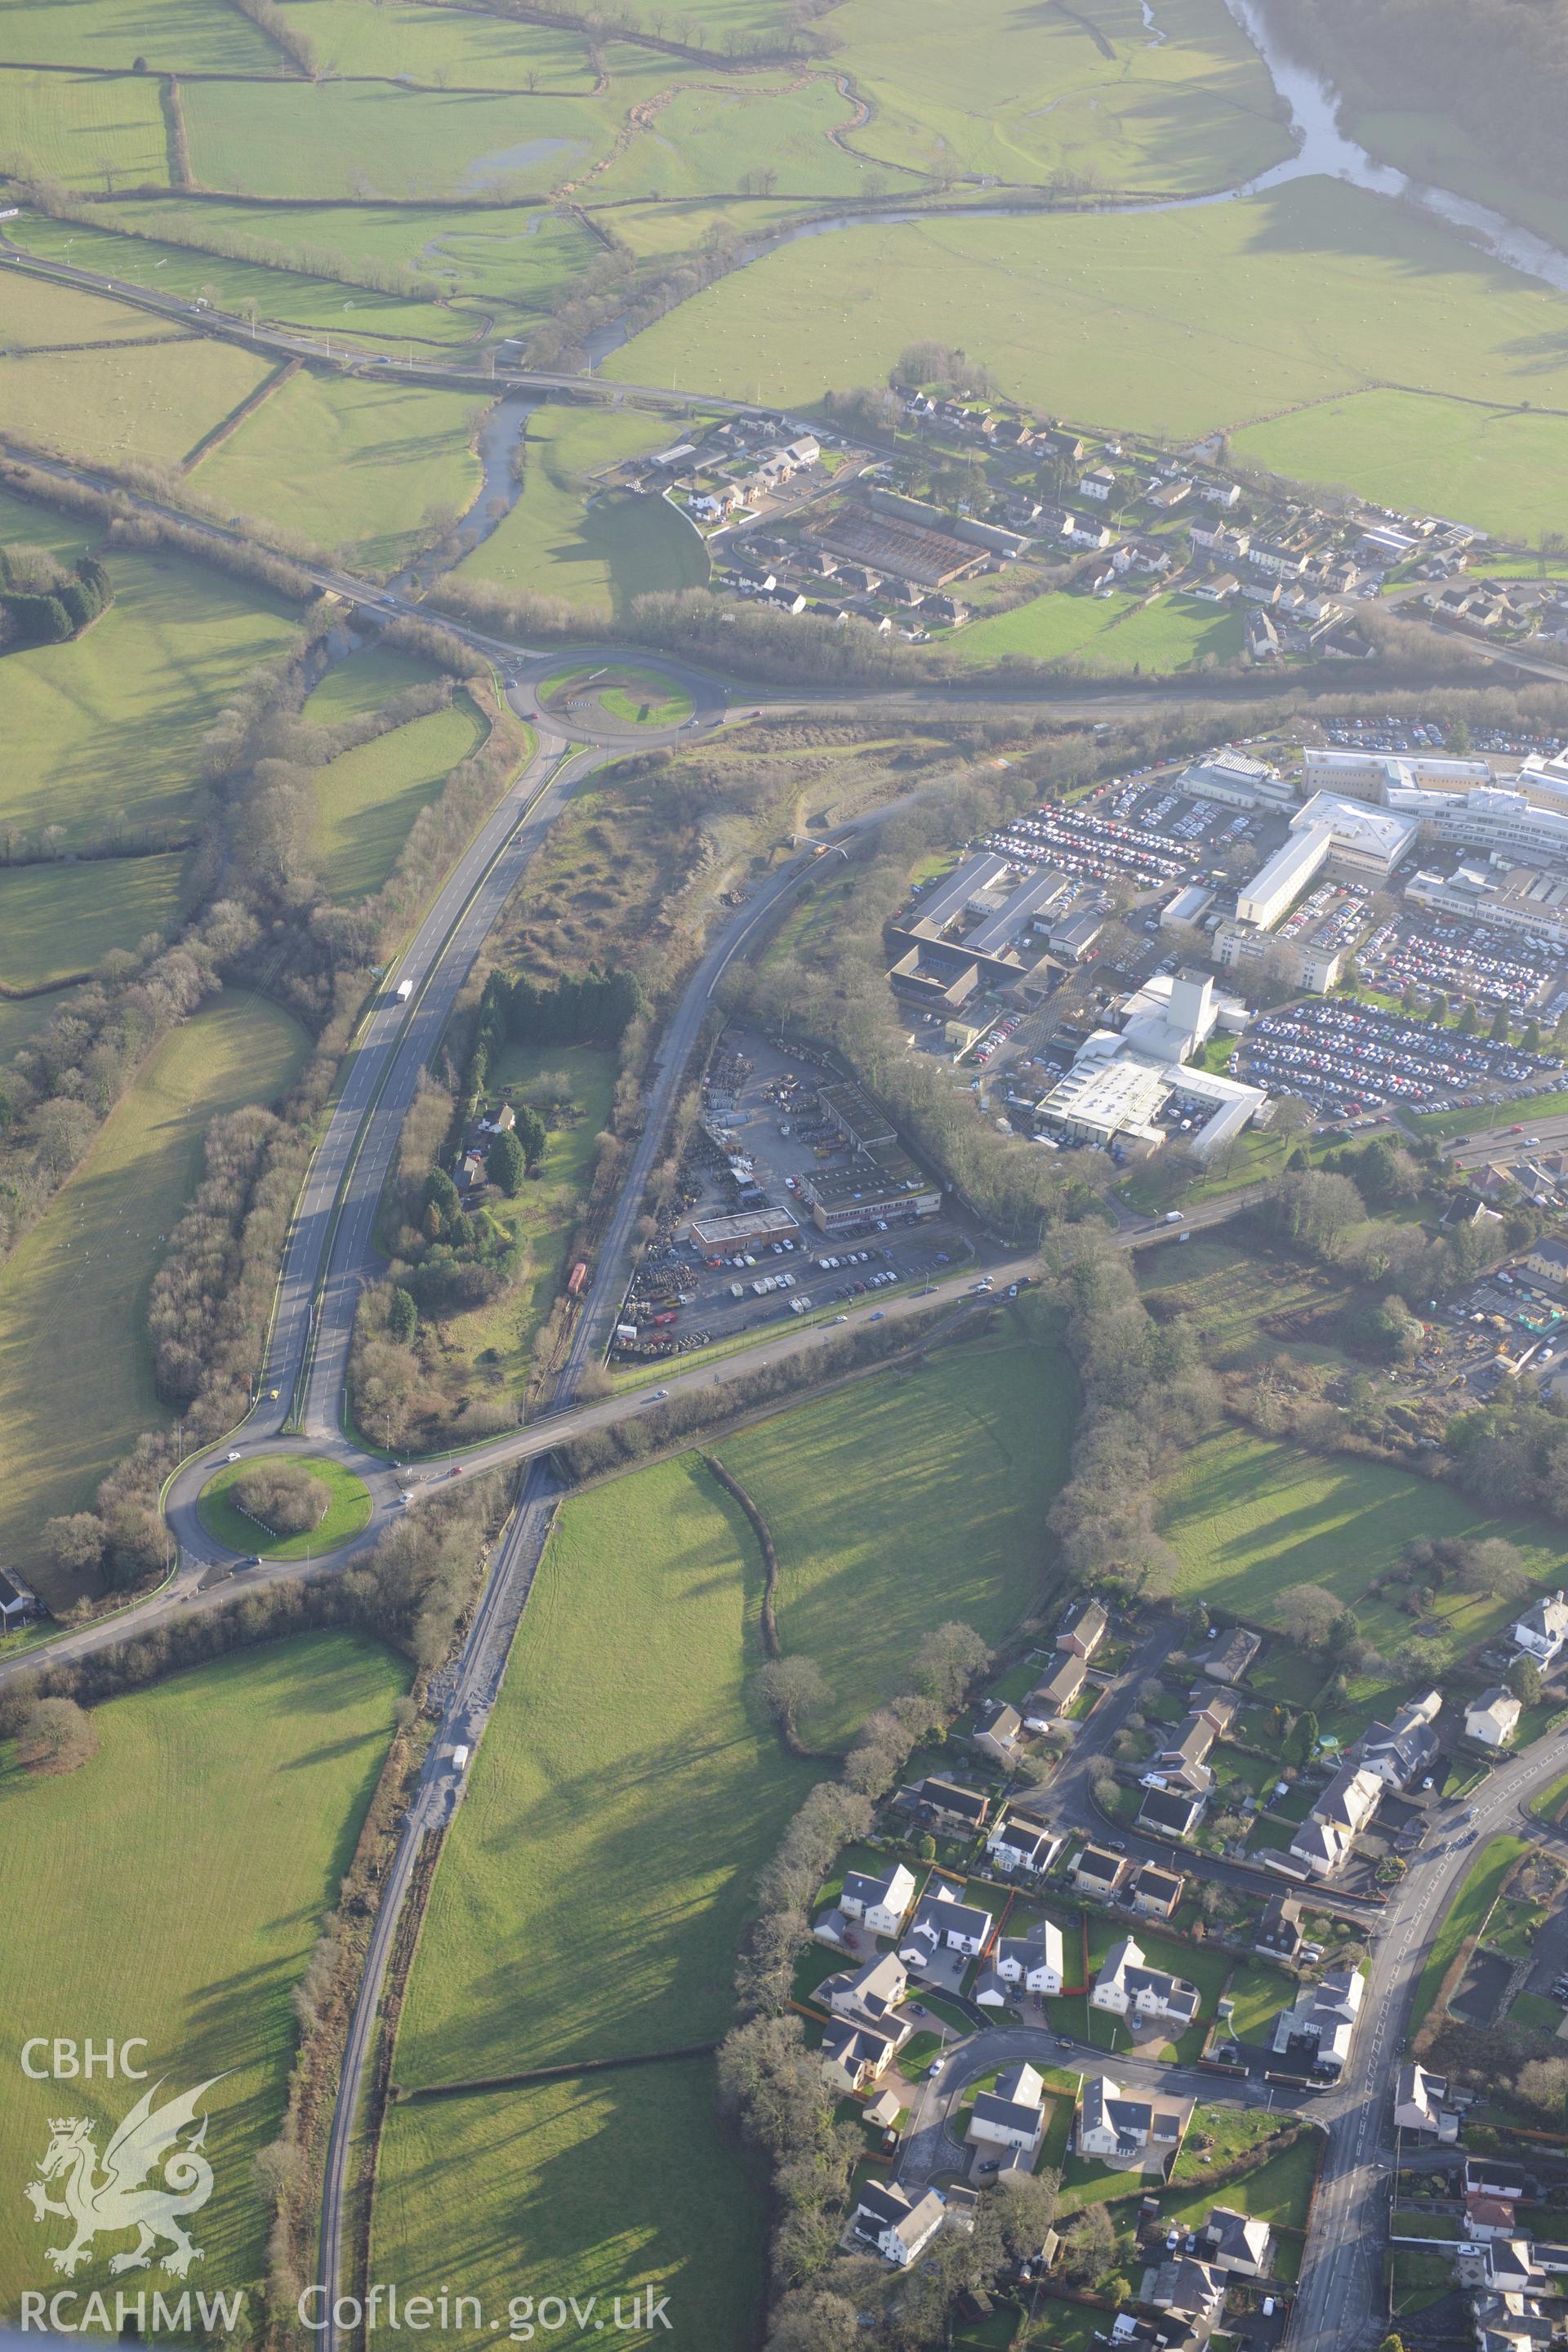 West Wales General Hospital, Carmarthen. Oblique aerial photograph taken during the Royal Commission's programme of archaeological aerial reconnaissance by Toby Driver on 6th January 2015.